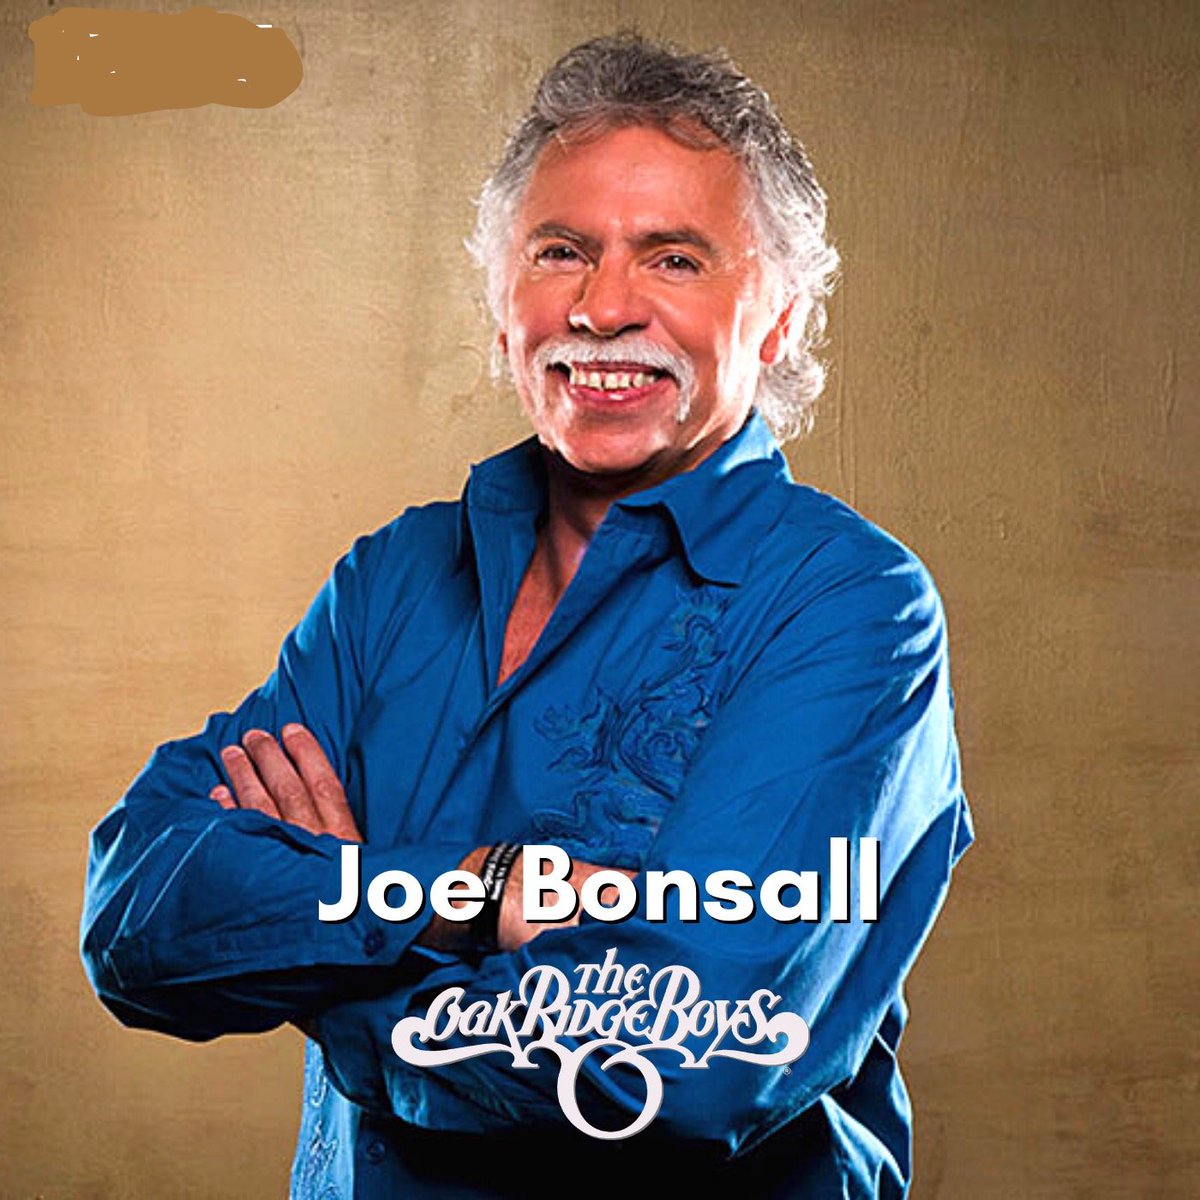 Happy Birthday to my former boss and a friend, Joe Bonsall. Solomon and I love you and wish you the very best of everything. #joebonsall #oakridgeboys #author #singer #patriot #friend #countrymusic #gospelmusic